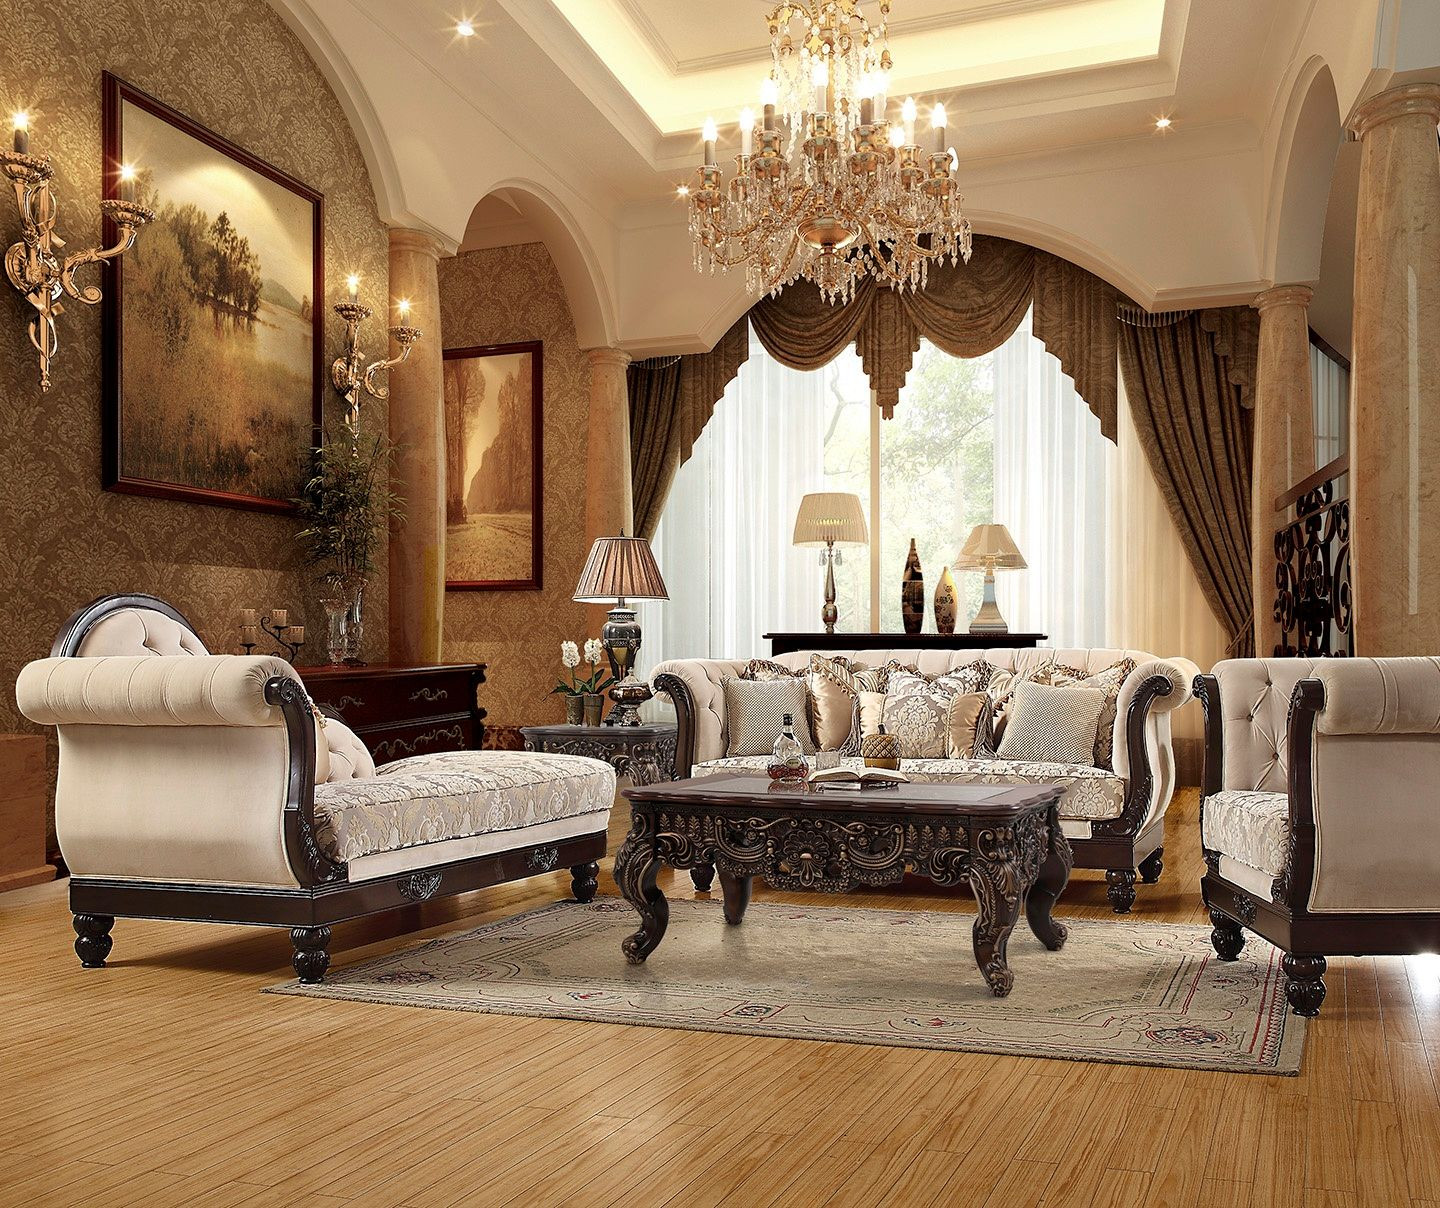 Living Room Chair Styles
 Luxurious Traditional Style Formal Living Room Furniture